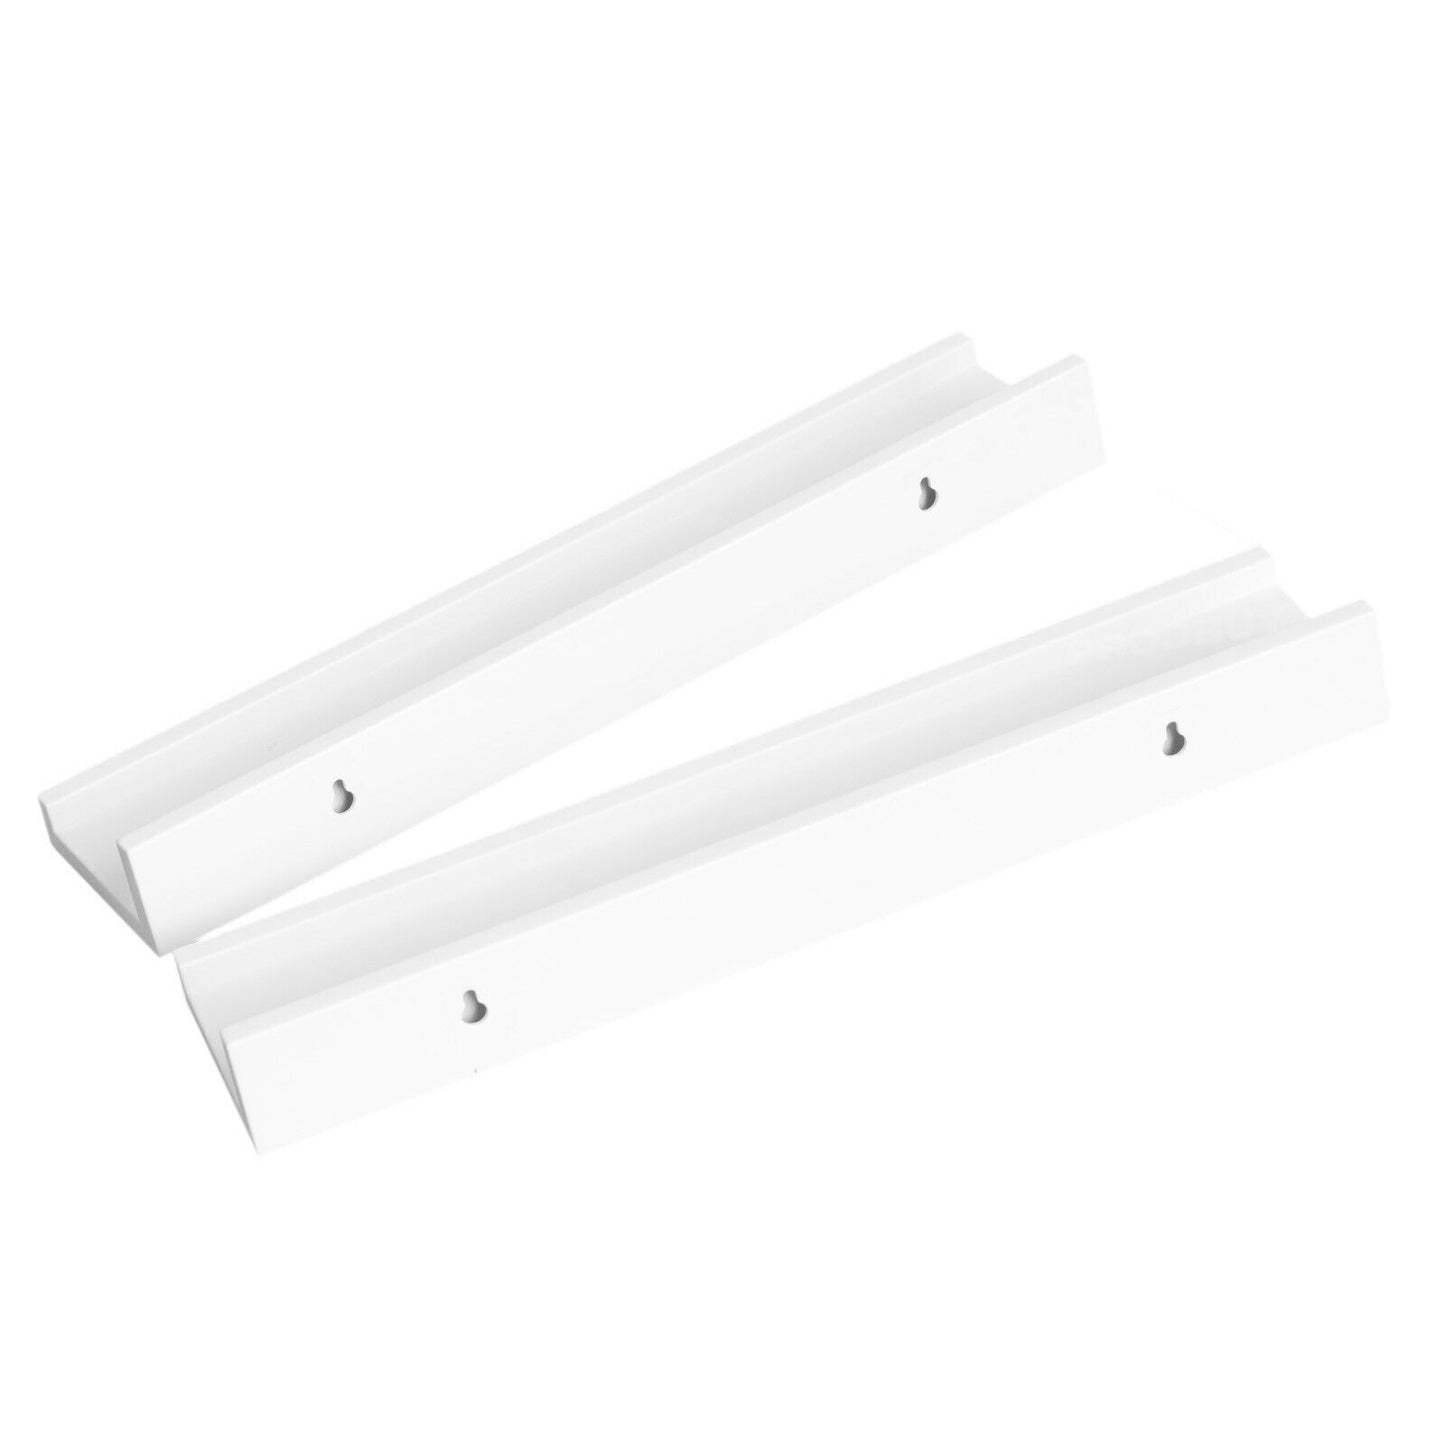 Pack of 2 Narrow 45cm Floating Wall Shelves